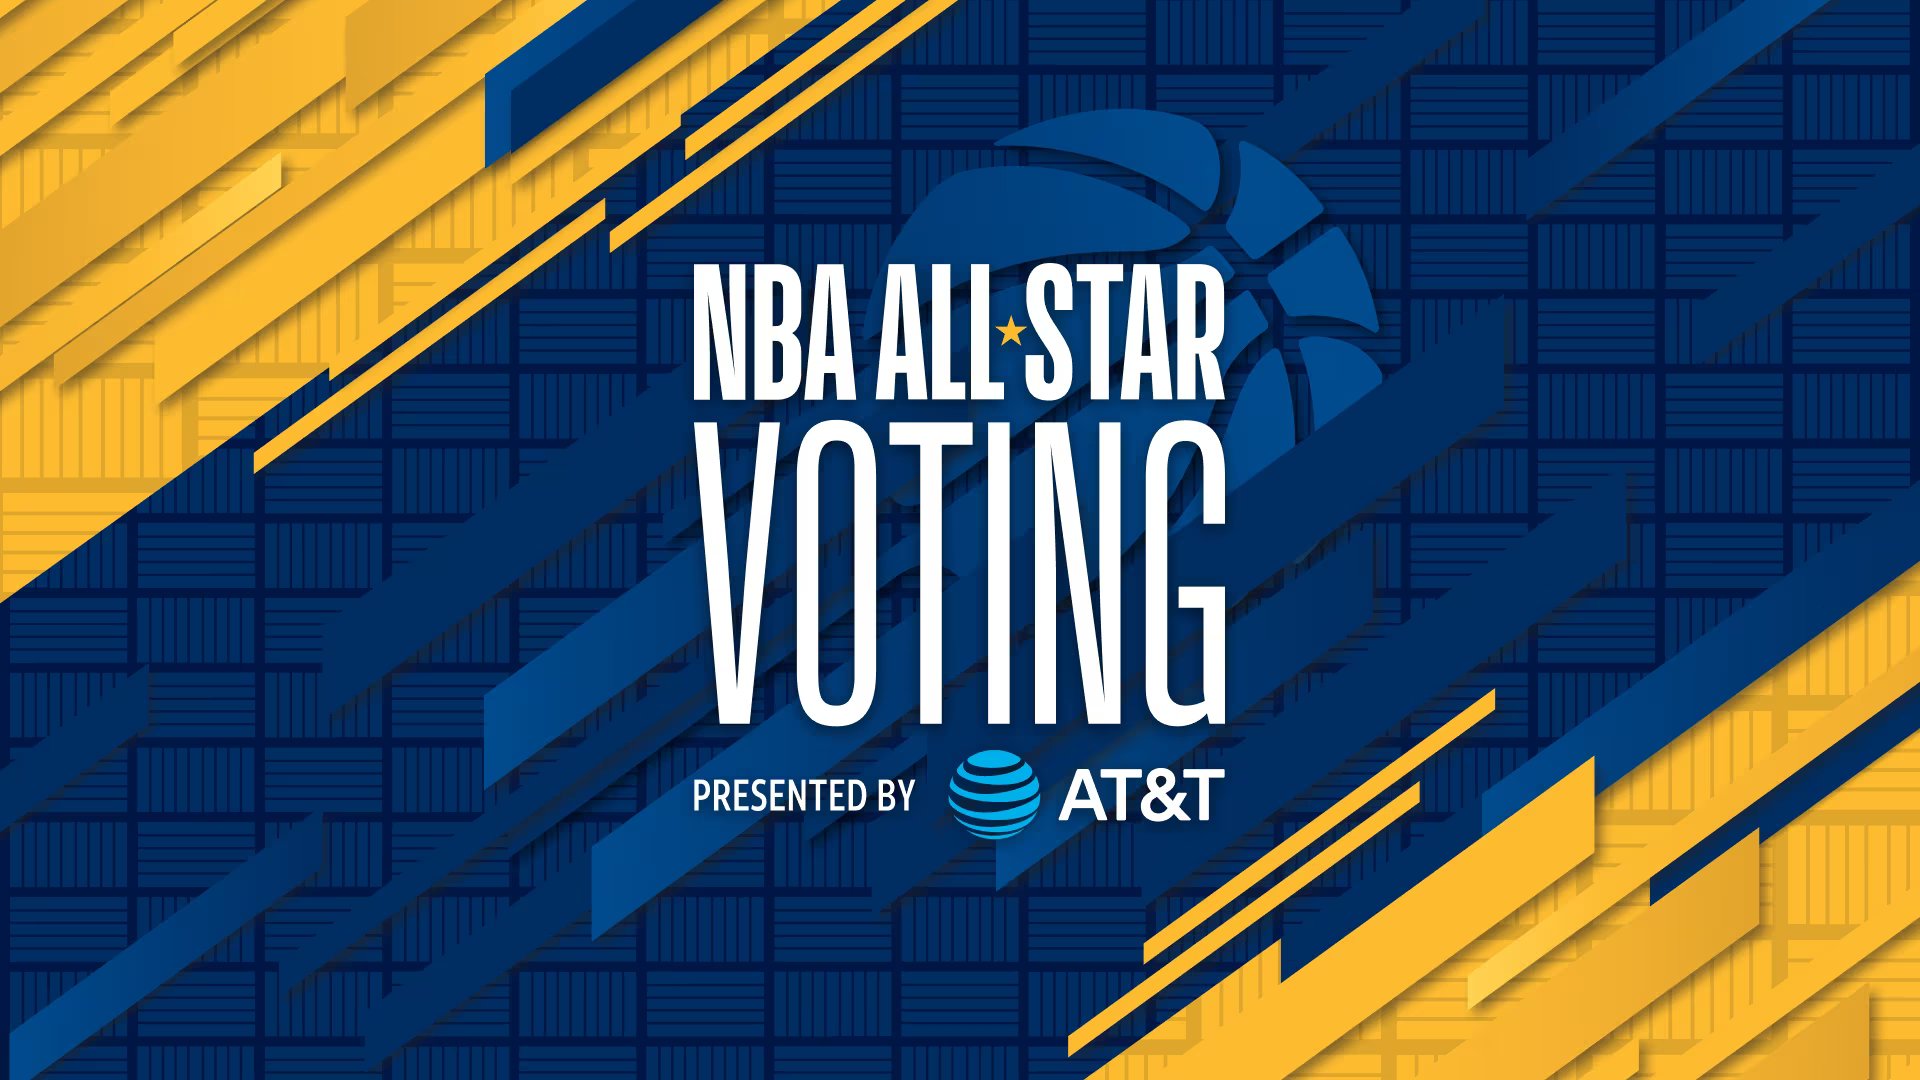 NBA AllStar Voting presented by AT&T tips off Dec. 19